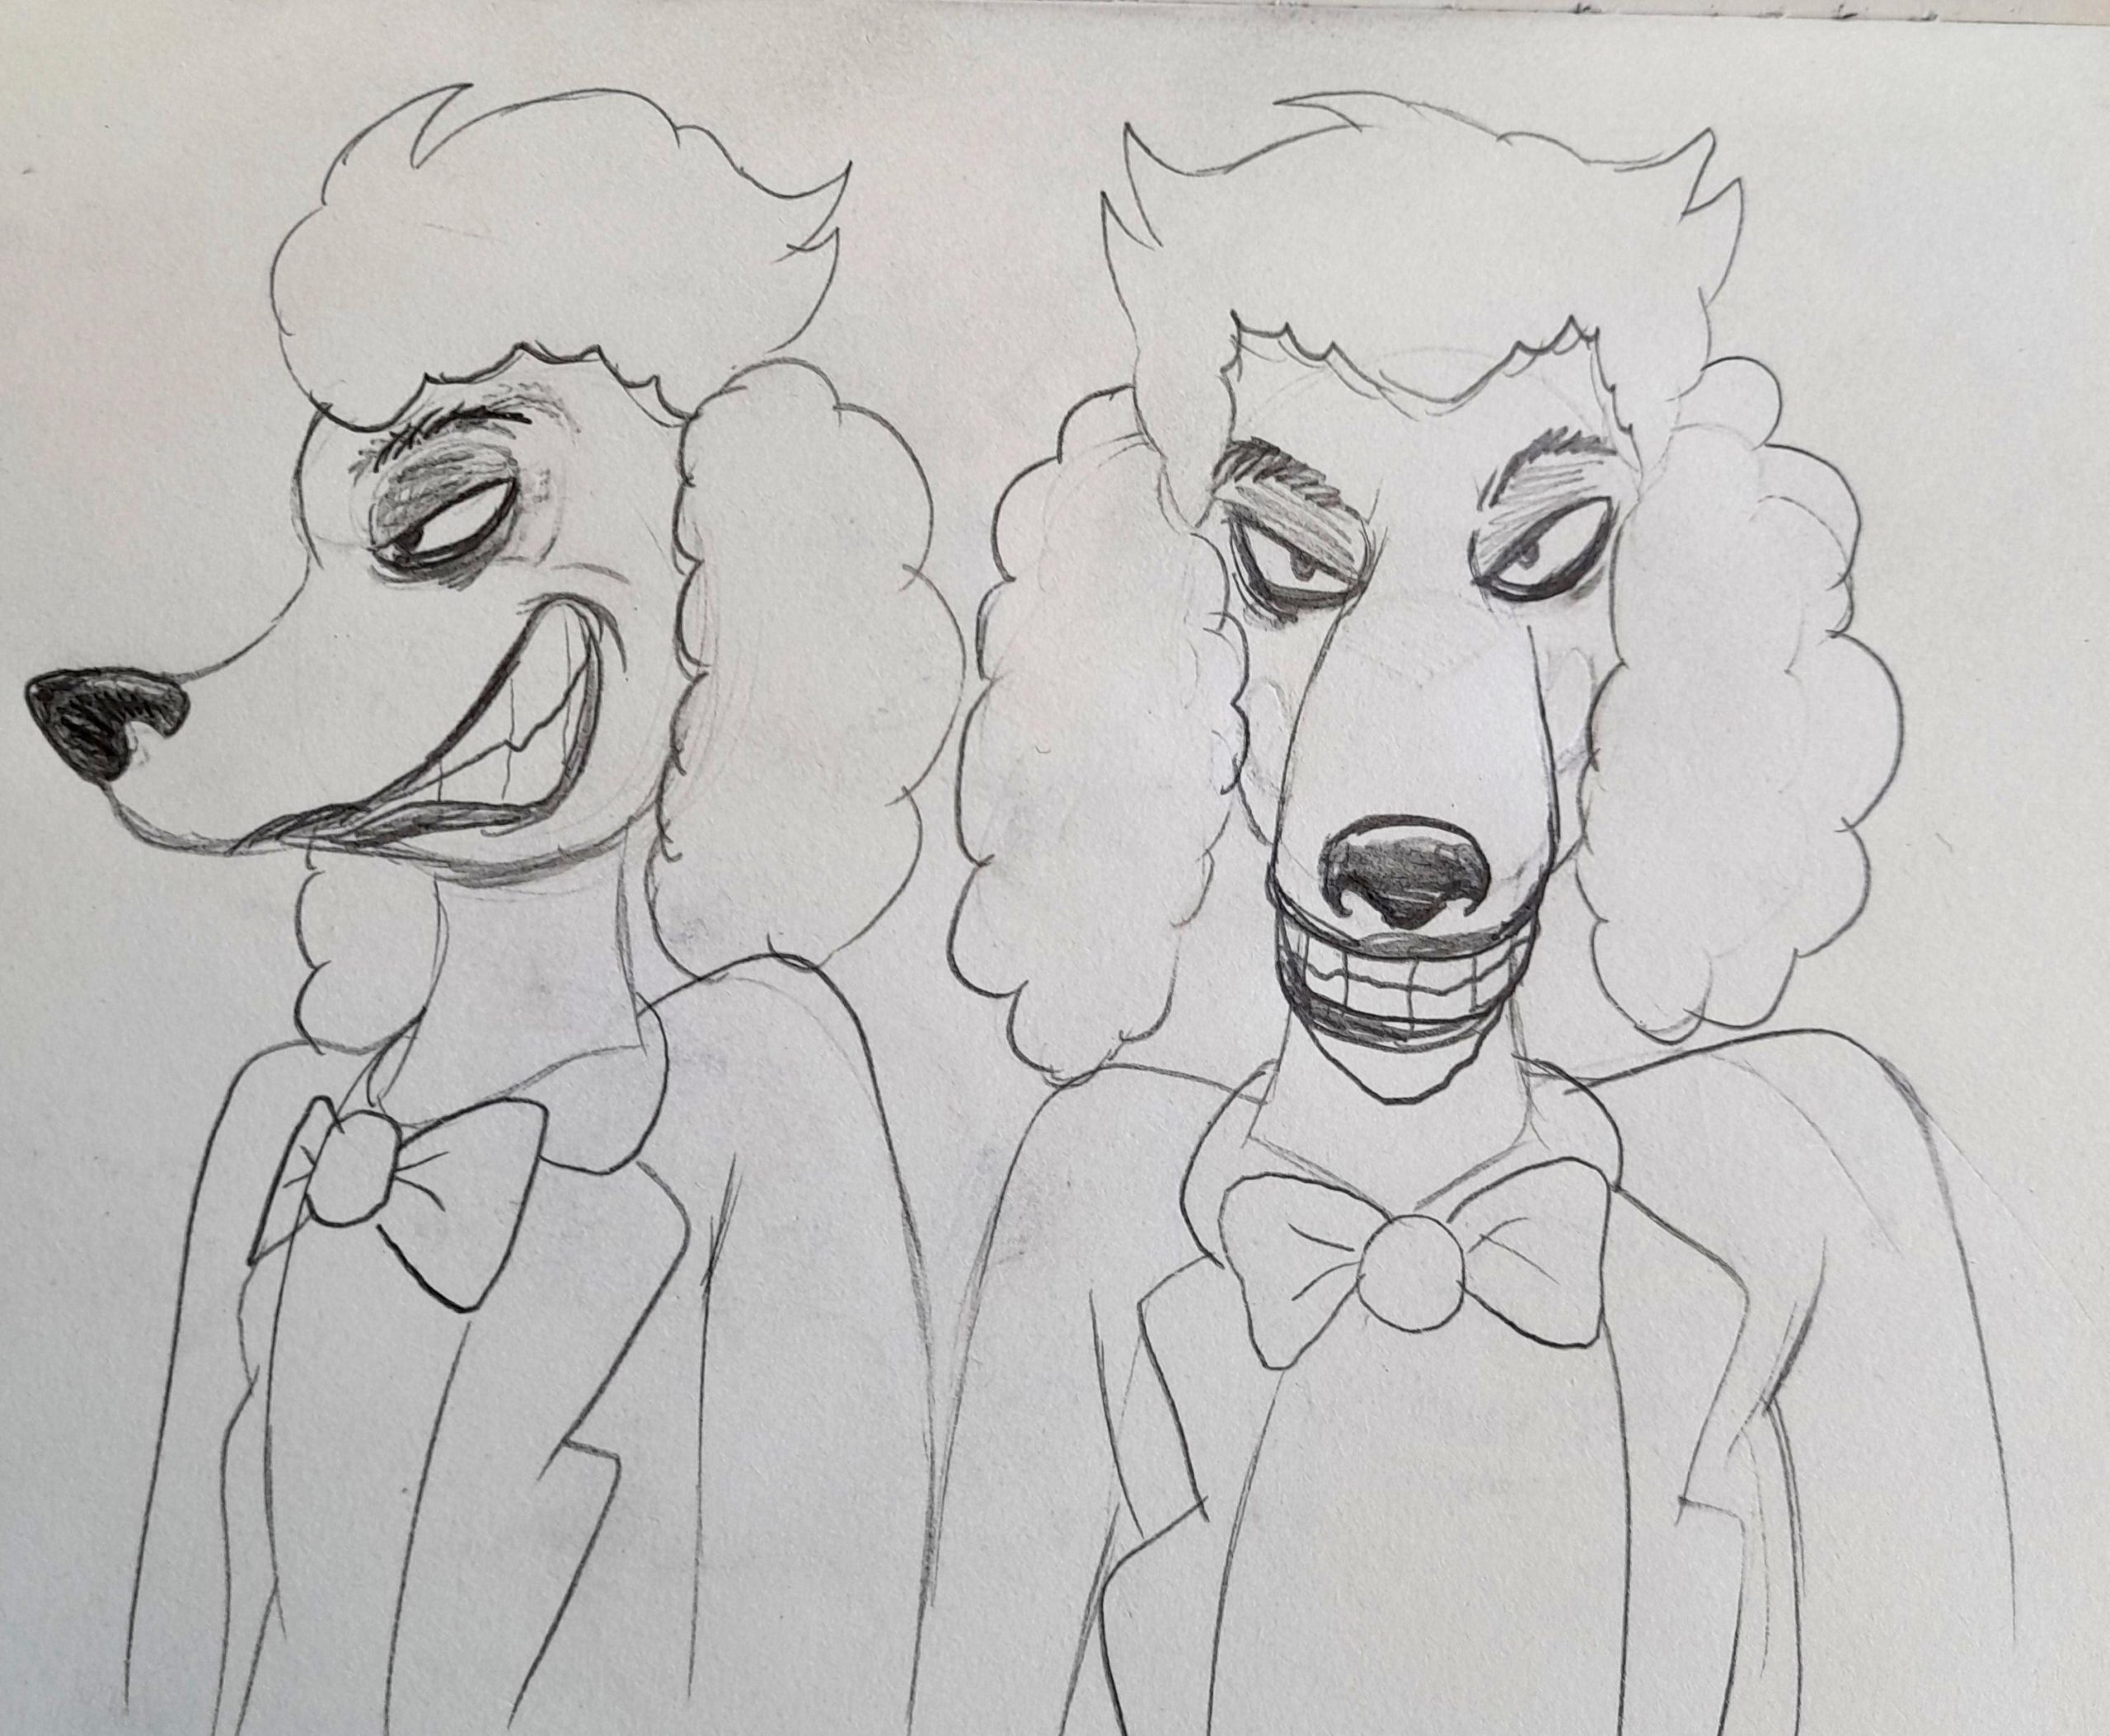 Joker poodle front and aspect profile